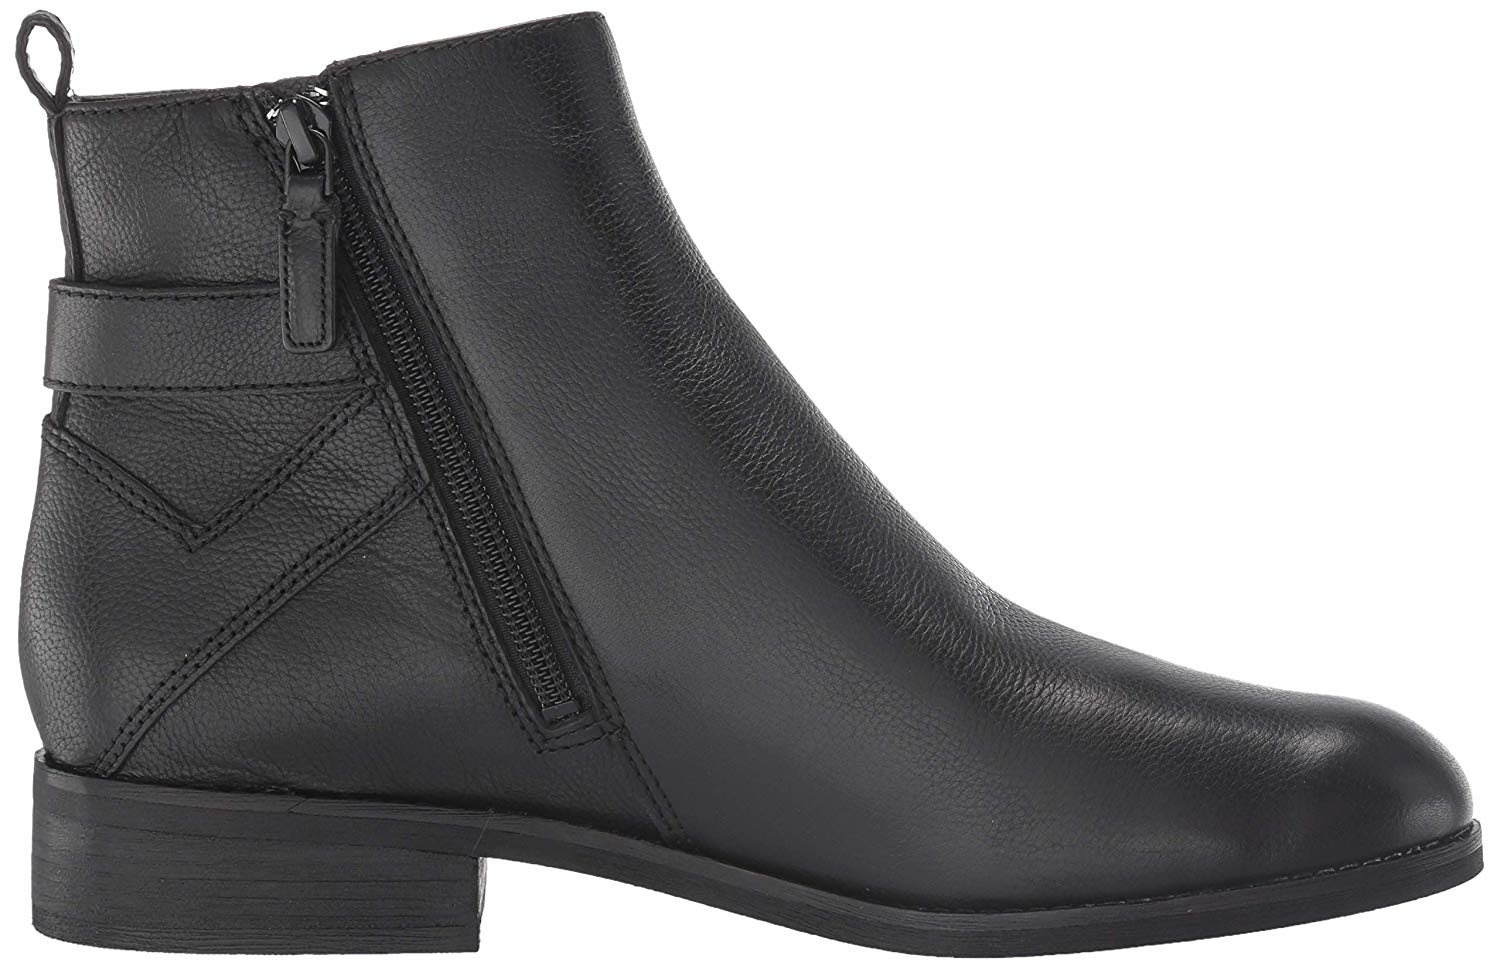 Cole Haan Women's Hollyn Bootie Ankle Boot, Black, Size 8.5 iyEb | eBay